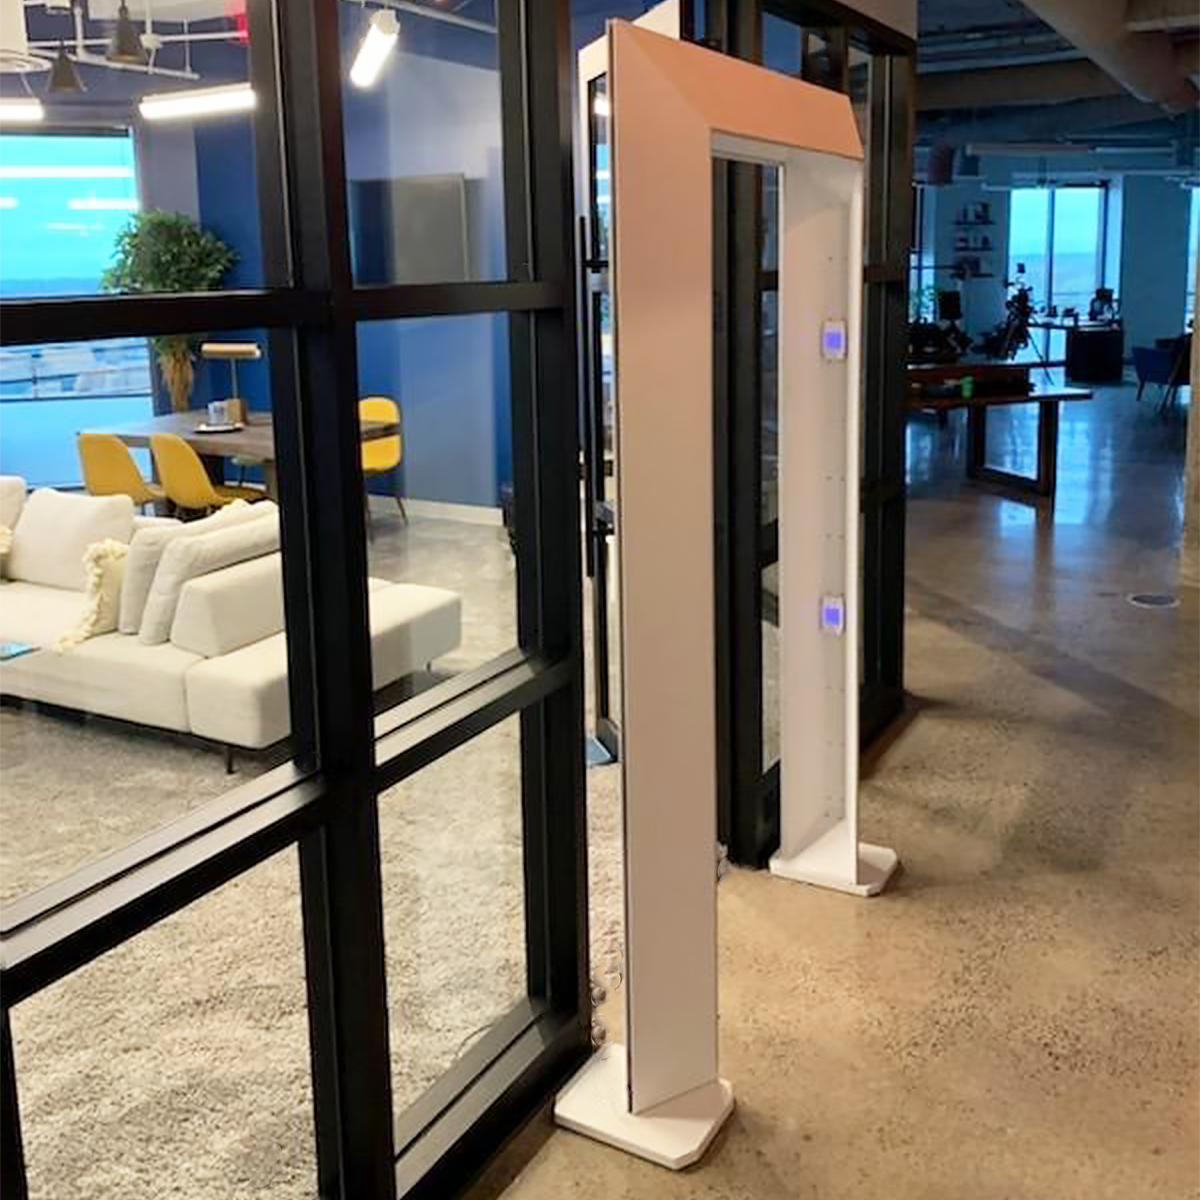 The Cleanse Portal is a free-standing walk-through arch sanitizer, similar in size and shape to a metal detector, that inactivates bacteria and viruses on skin, clothing and goods with a dosage requirement as low as 20 seconds. 